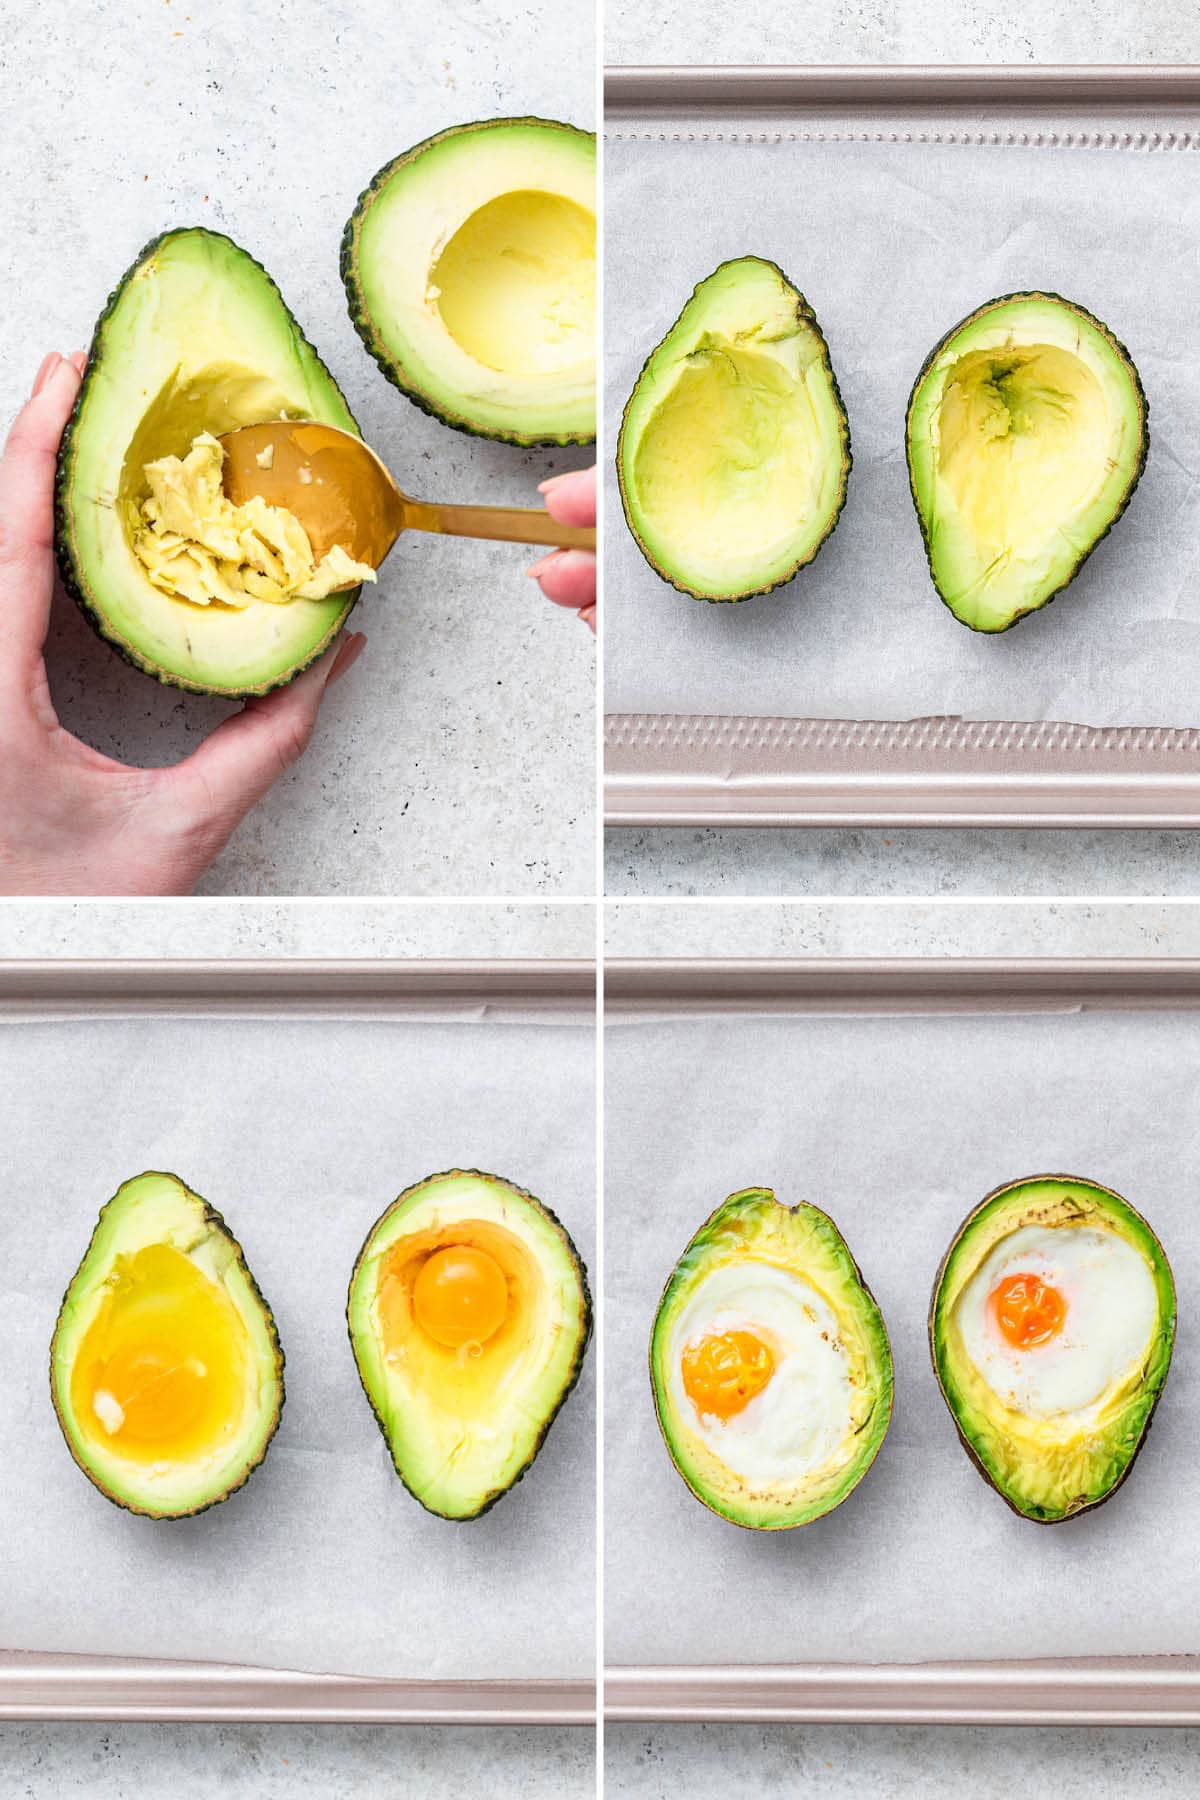 Photos showing the steps to make Baked Avocado Eggs: hollowing our an avocado, cracking an egg inside and then baking them.